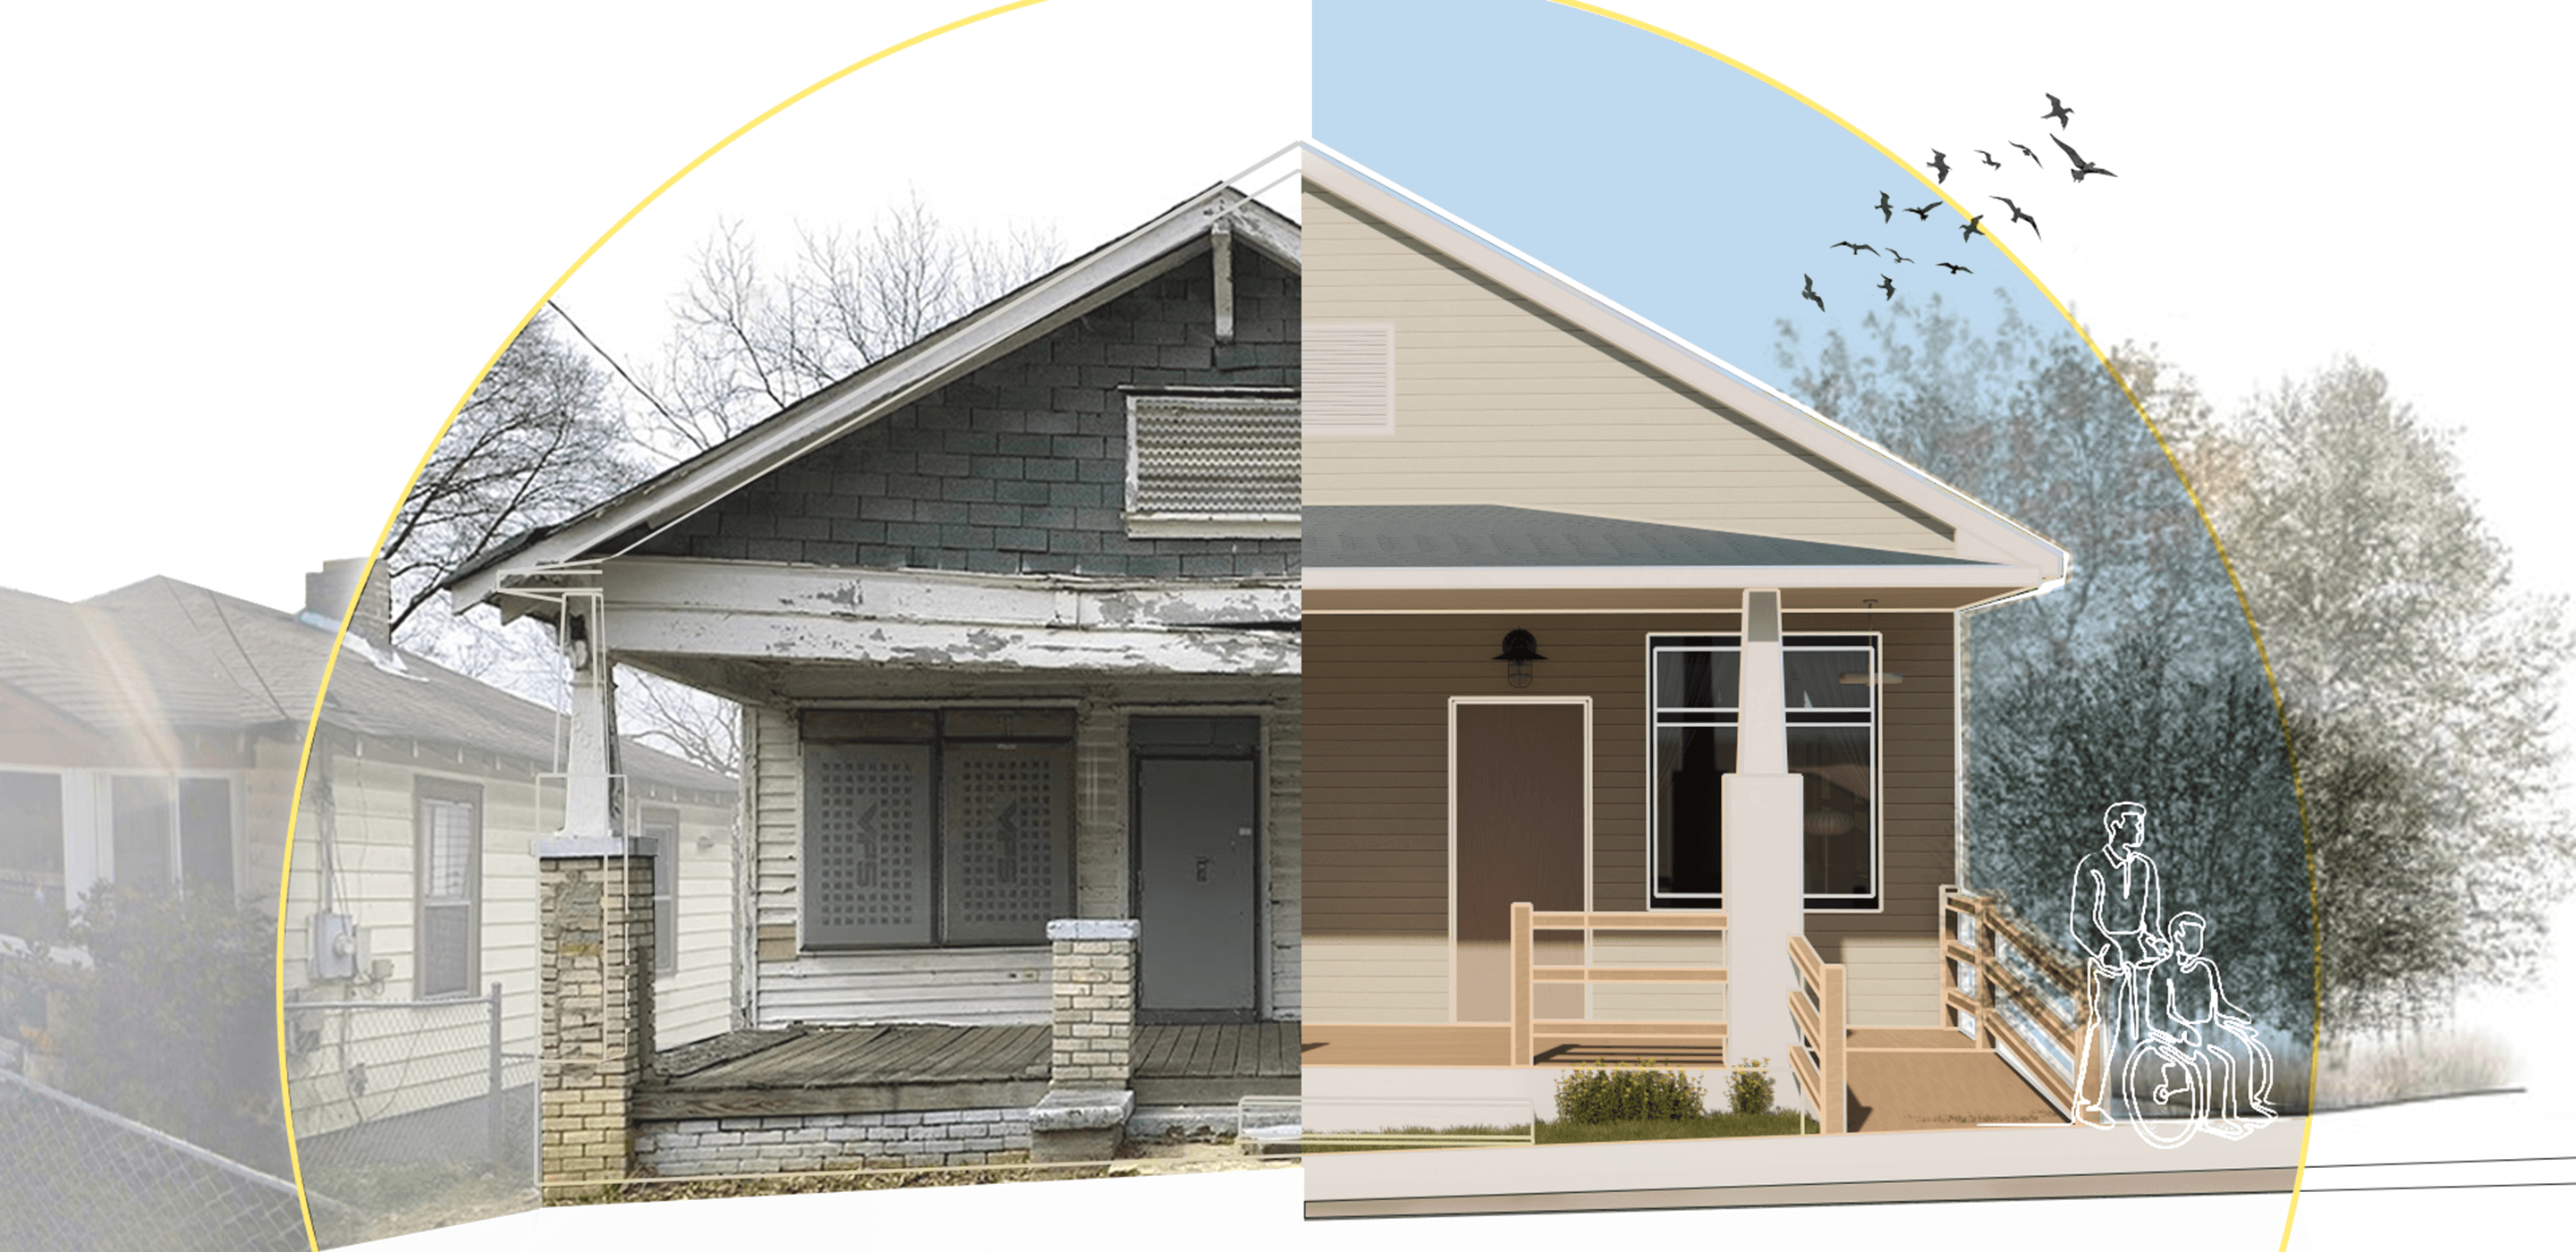 Photo of a historic home's existing condition and a rendering of energy-efficient, water-wise, healthy retrofit strategies